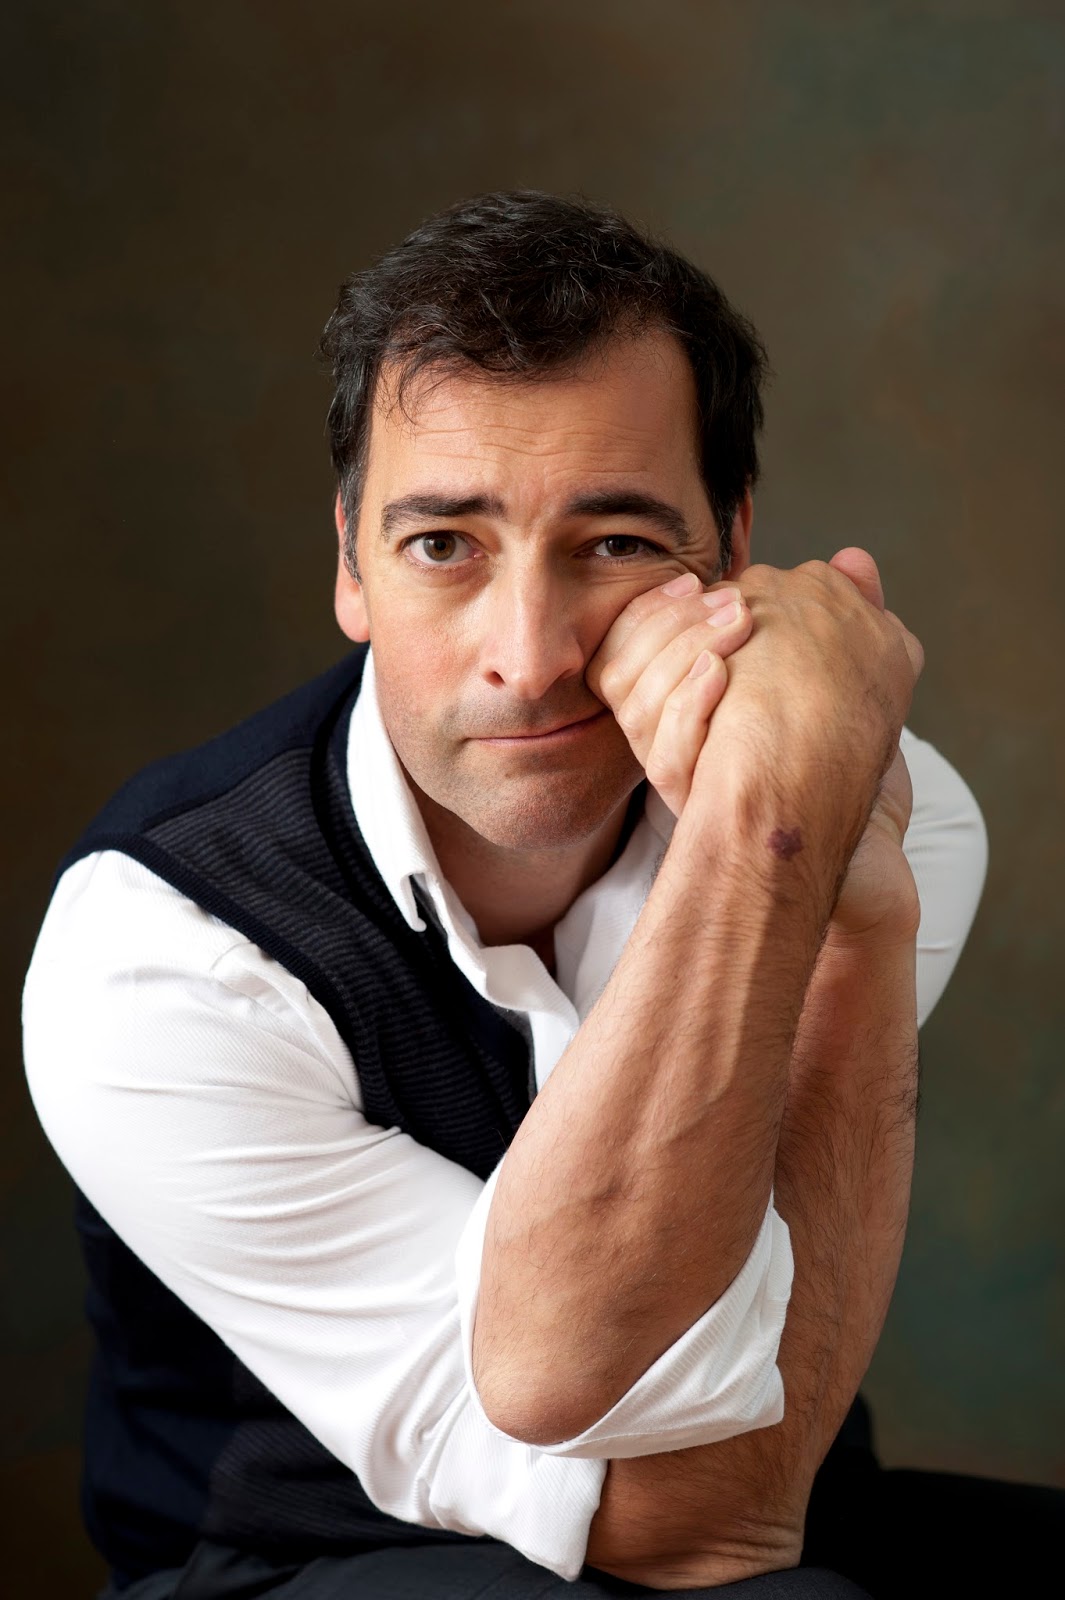 The Cirencester Scene Blog: Sundial Theatre Review: Alistair McGowan ...